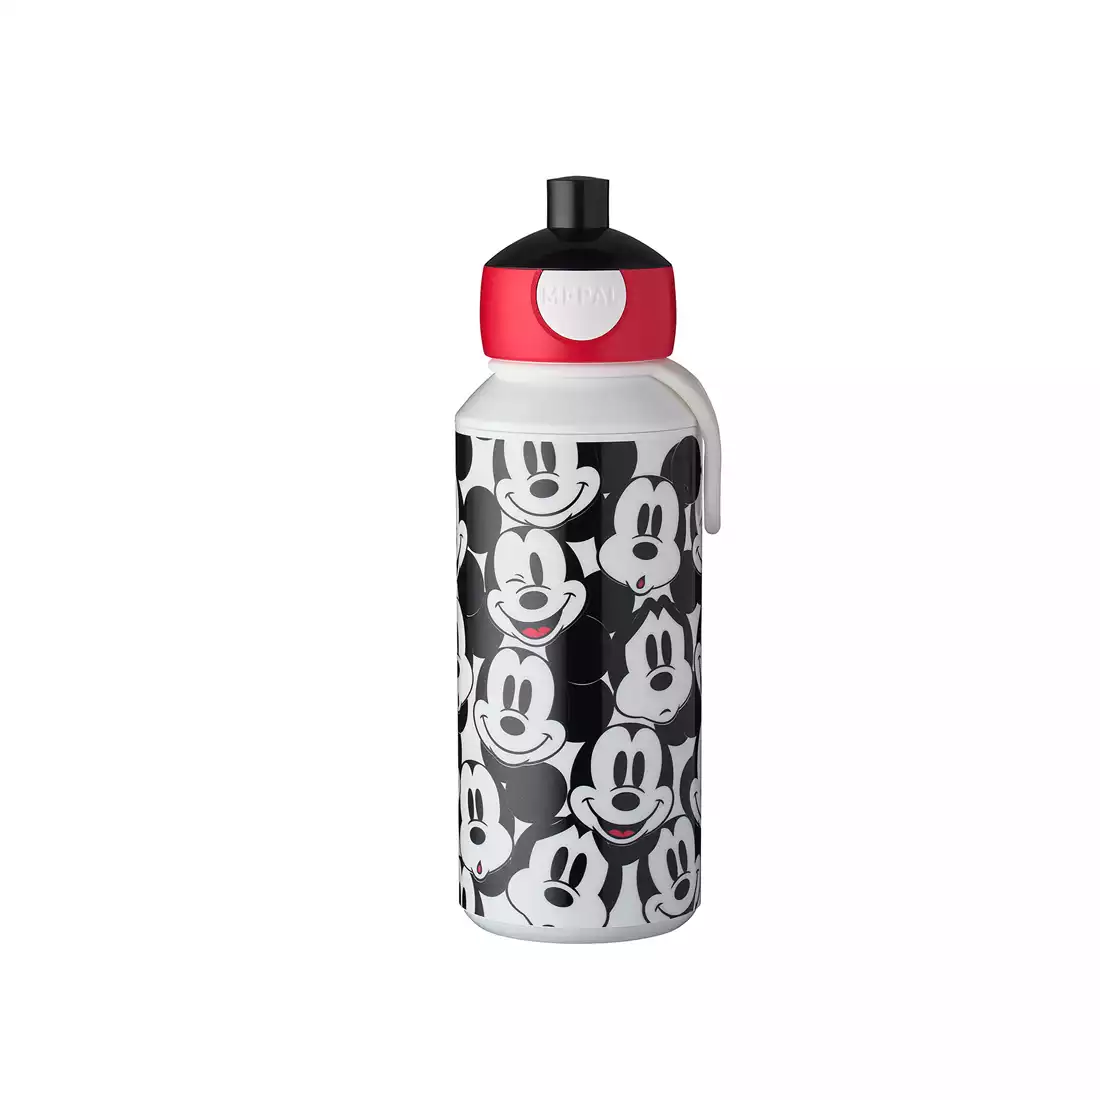 MEPAl CAMPUS POP-UP water bottle for children 400 ml, mickey mouse